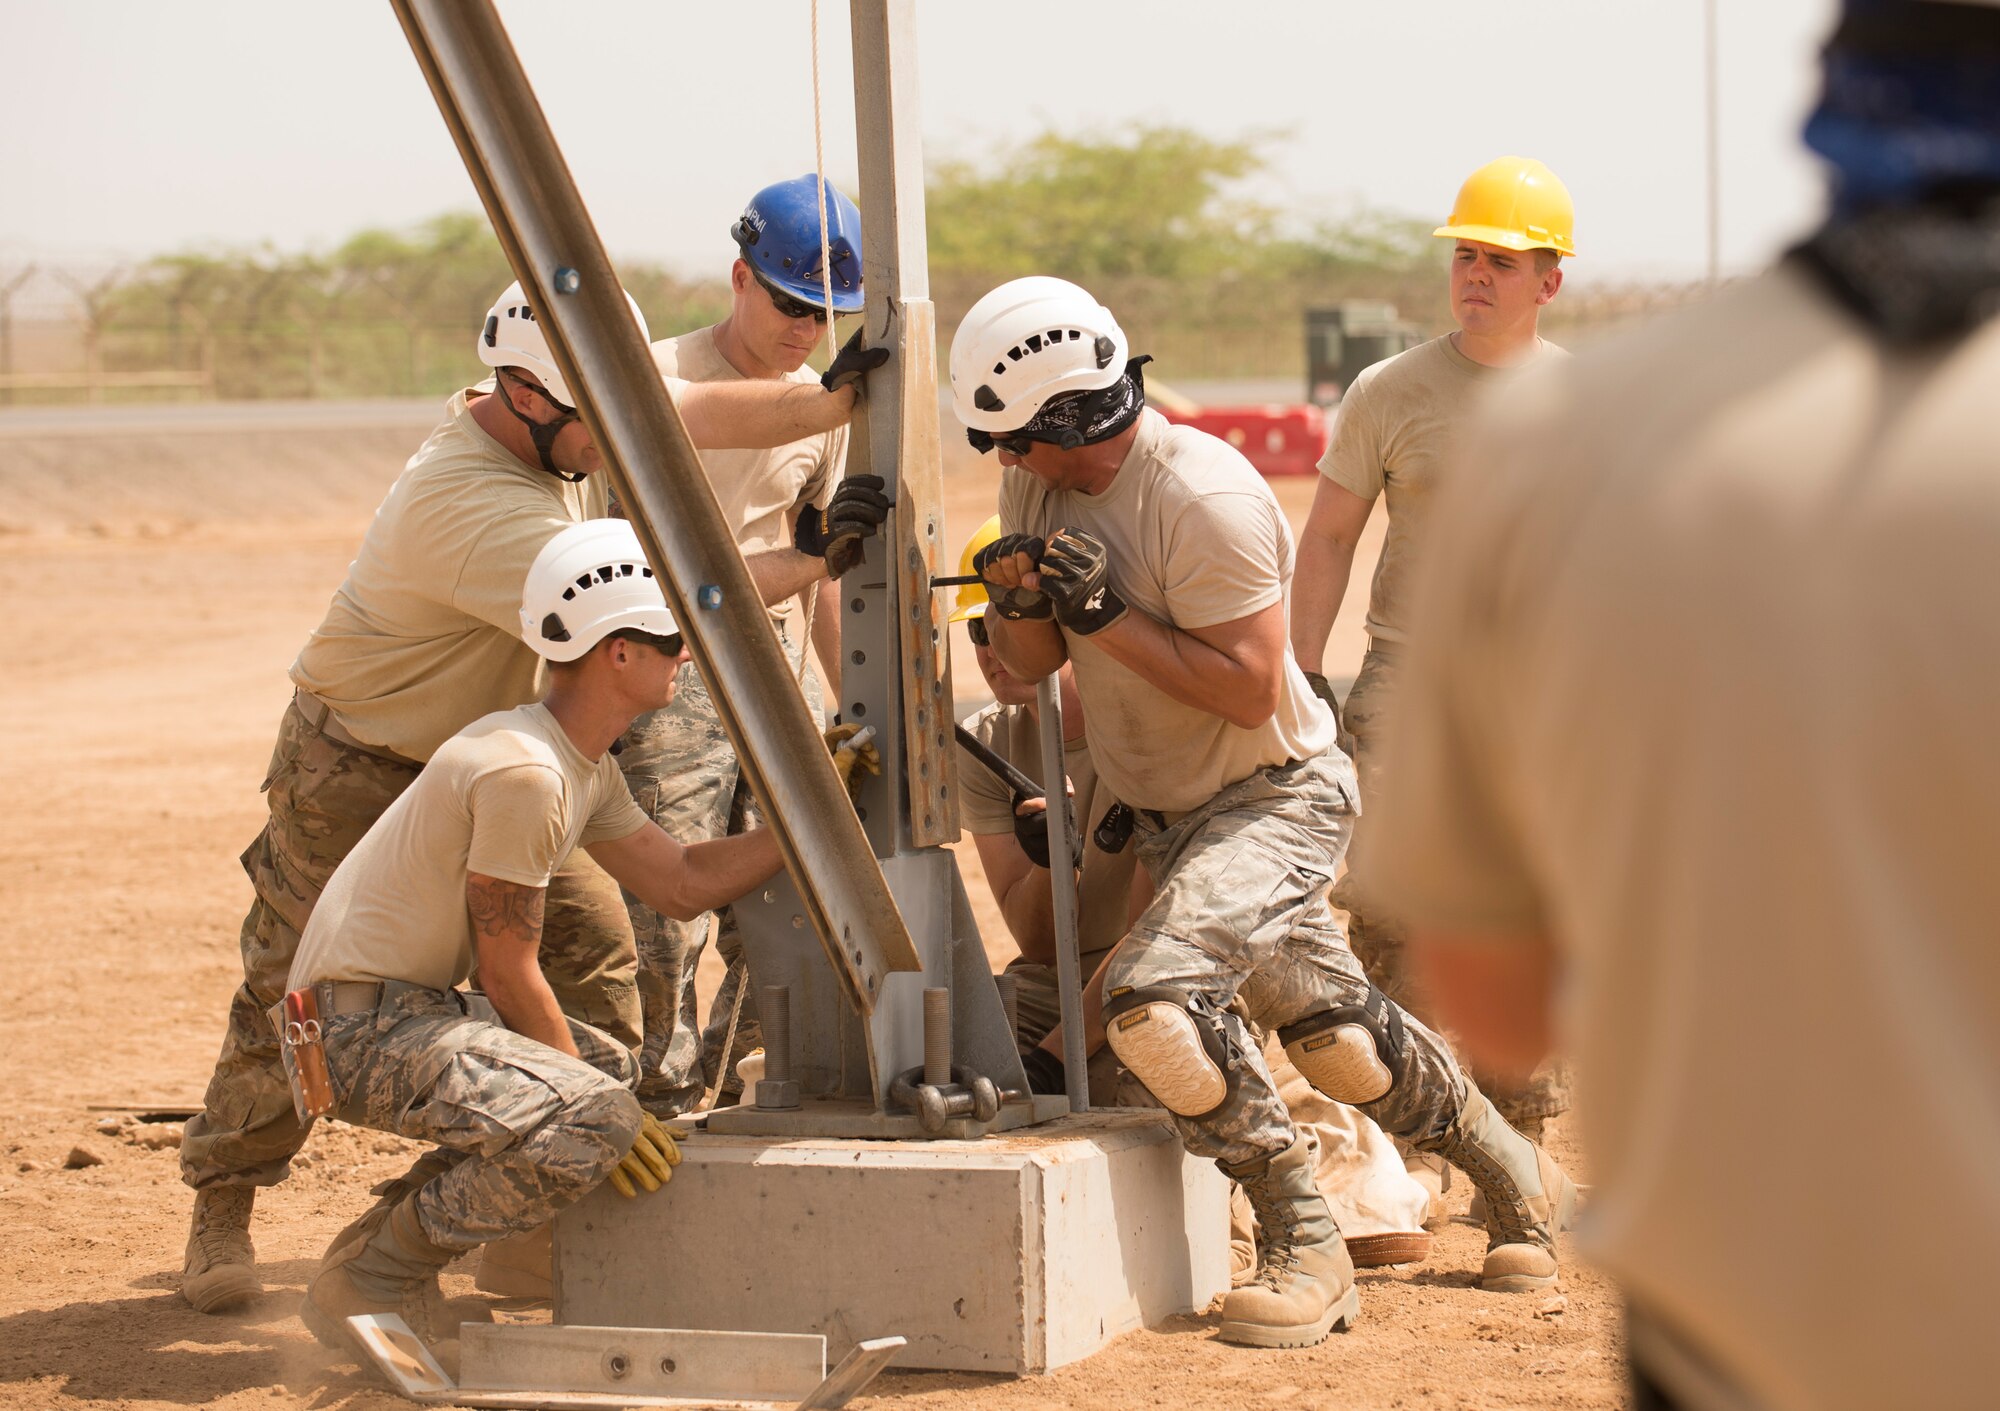 U.S. Air Force Airmen of the 205th Engineering Installation Squadron, Oklahoma City, line up pieces of the metal frame during construction of an AN/GPN-27 Airport Surveillance Radar System tower, May 26, 2016, at Camp Lemonnier, Djibouti. The new radar is a more permanent replacement for the short-term radar currently in operation. (U.S. Air Force photo by Staff Sgt. Tiffany DeNault)